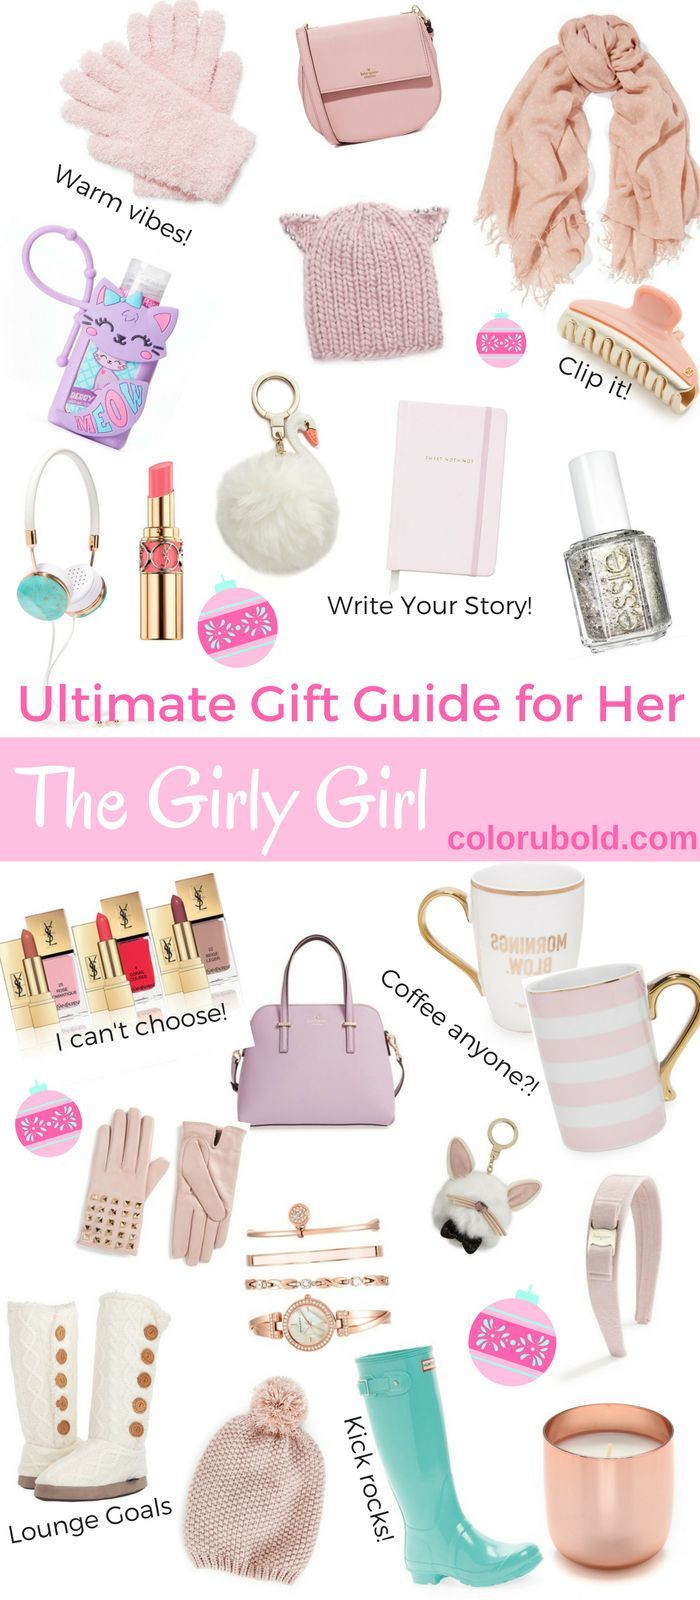 Girls Birthday Gifts
 The Ultimate Gift Guide for the Girly Girl